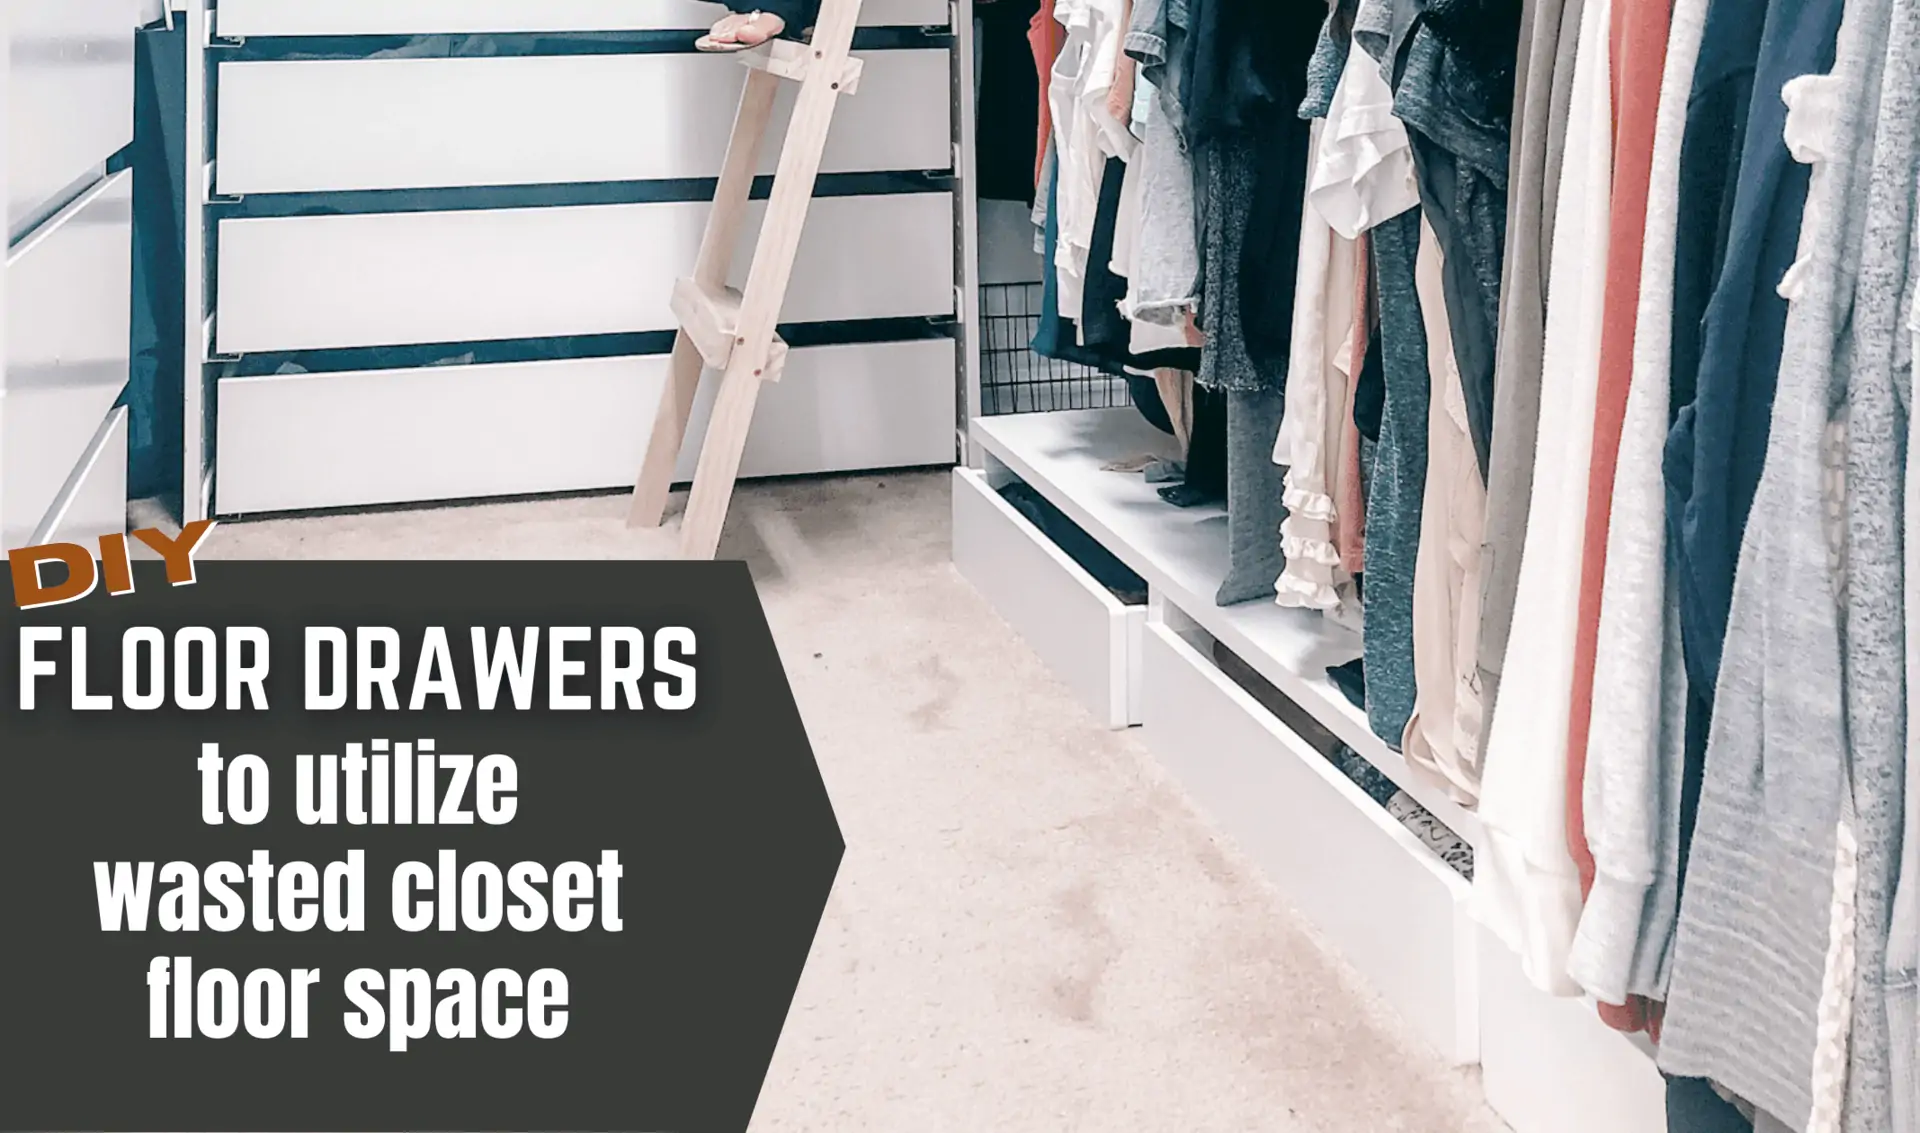 white drawers on the floor in the closet to create storage space in under utilized space